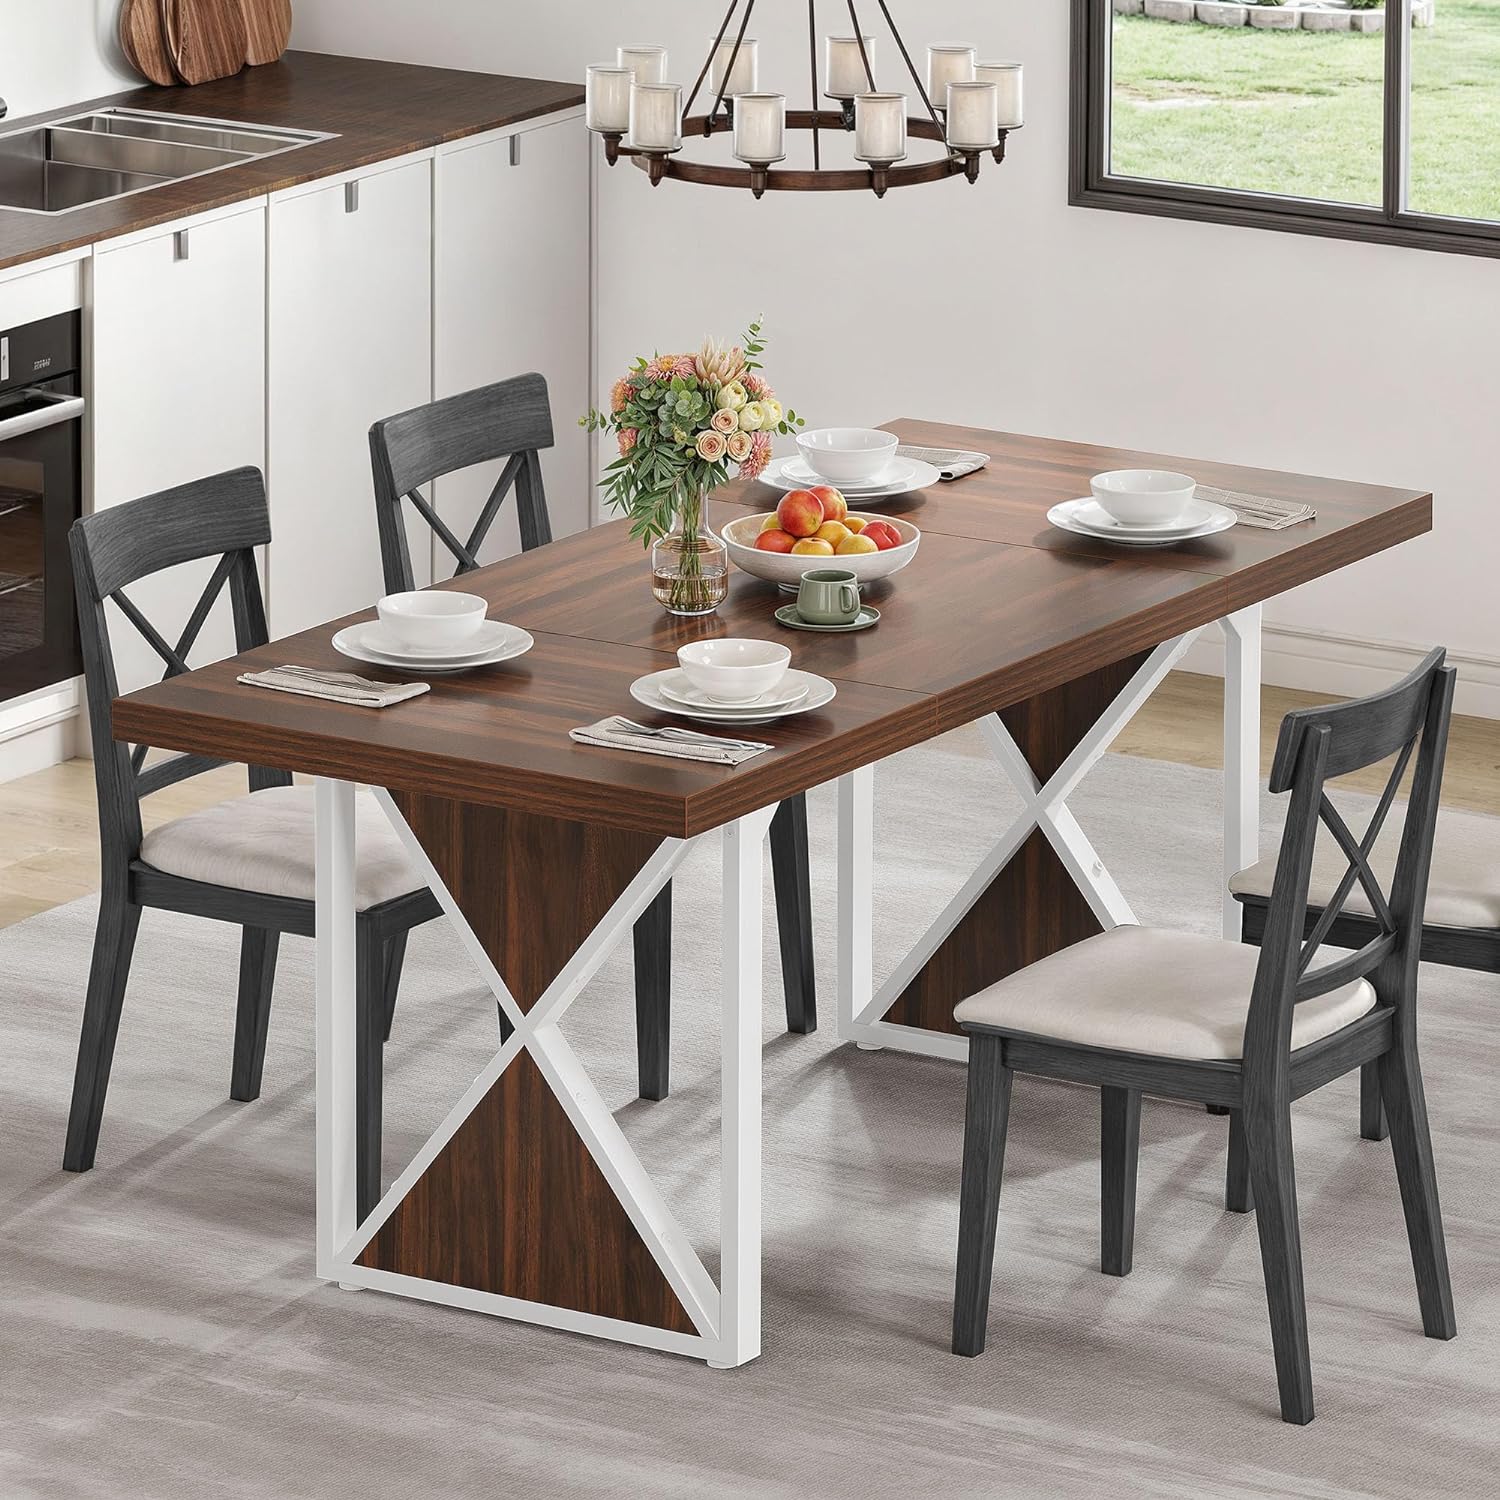 Farmhouse Dining Table for 6-8 People, 70.8-Inch Rectangular Wood Dining Table